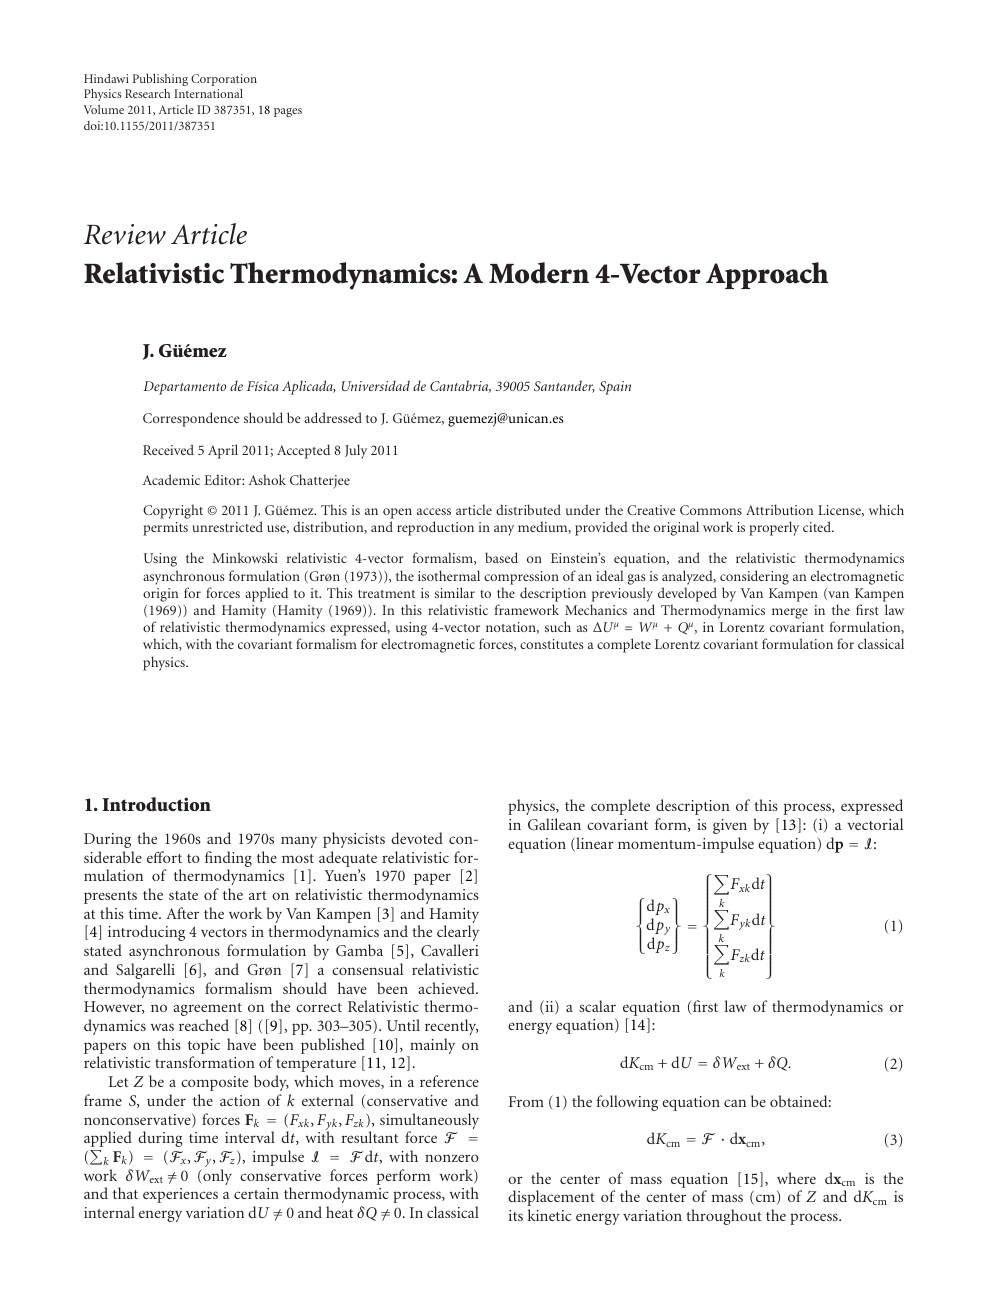 Relativistic Thermodynamics A Modern 4 Vector Approach Topic Of Research Paper In Physical Sciences Download Scholarly Article Pdf And Read For Free On Cyberleninka Open Science Hub